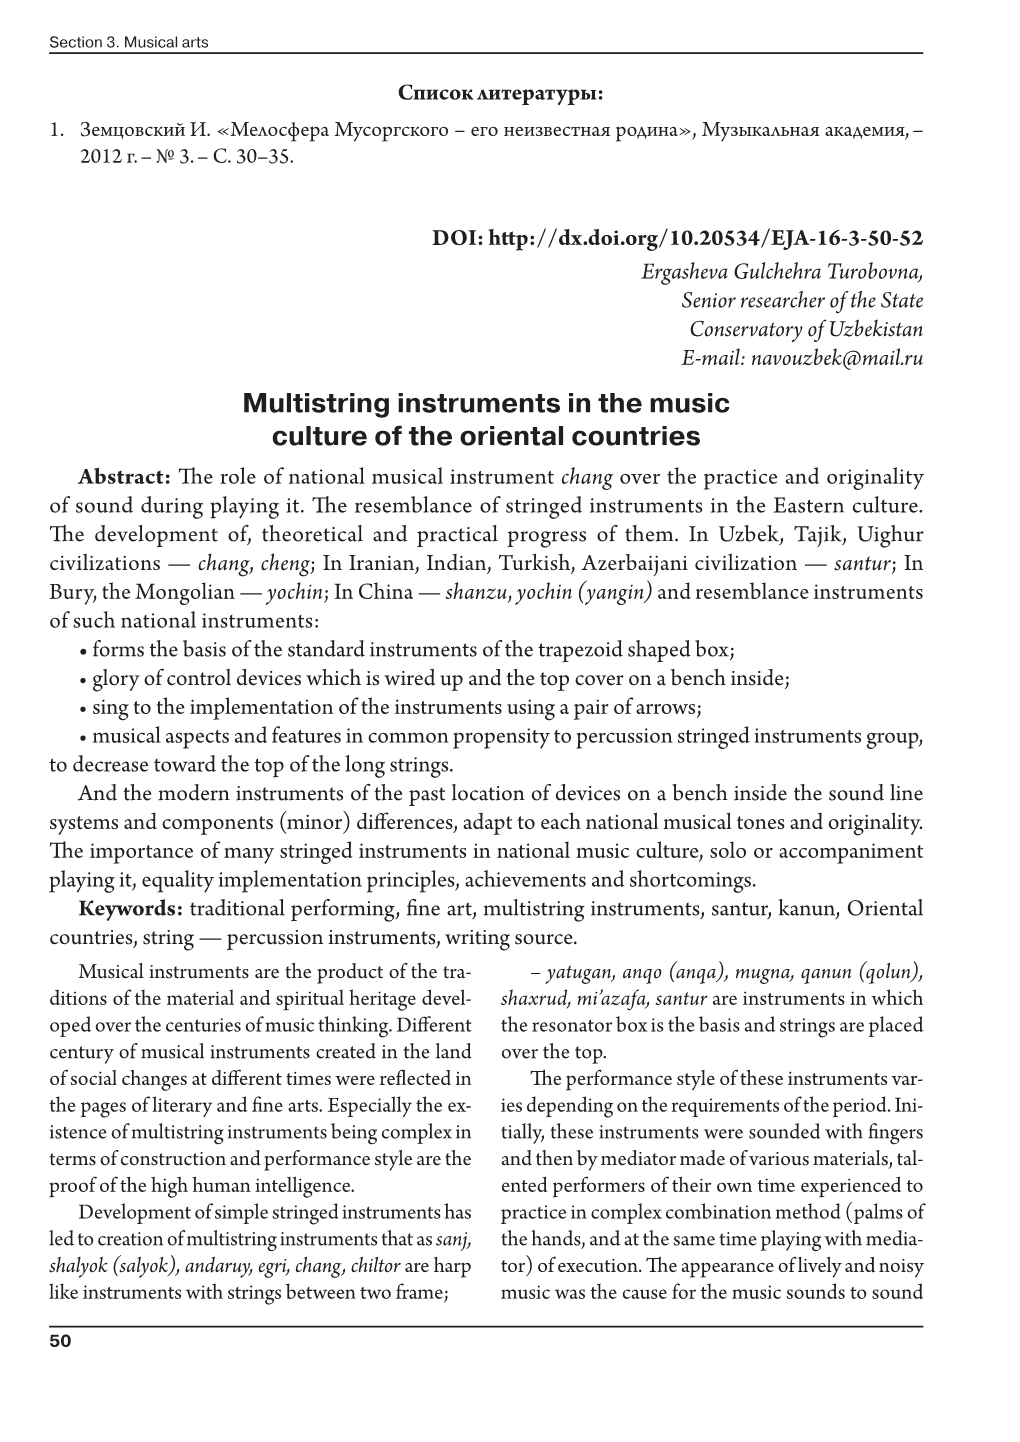 Multistring Instruments in the Music Culture of the Oriental Countries